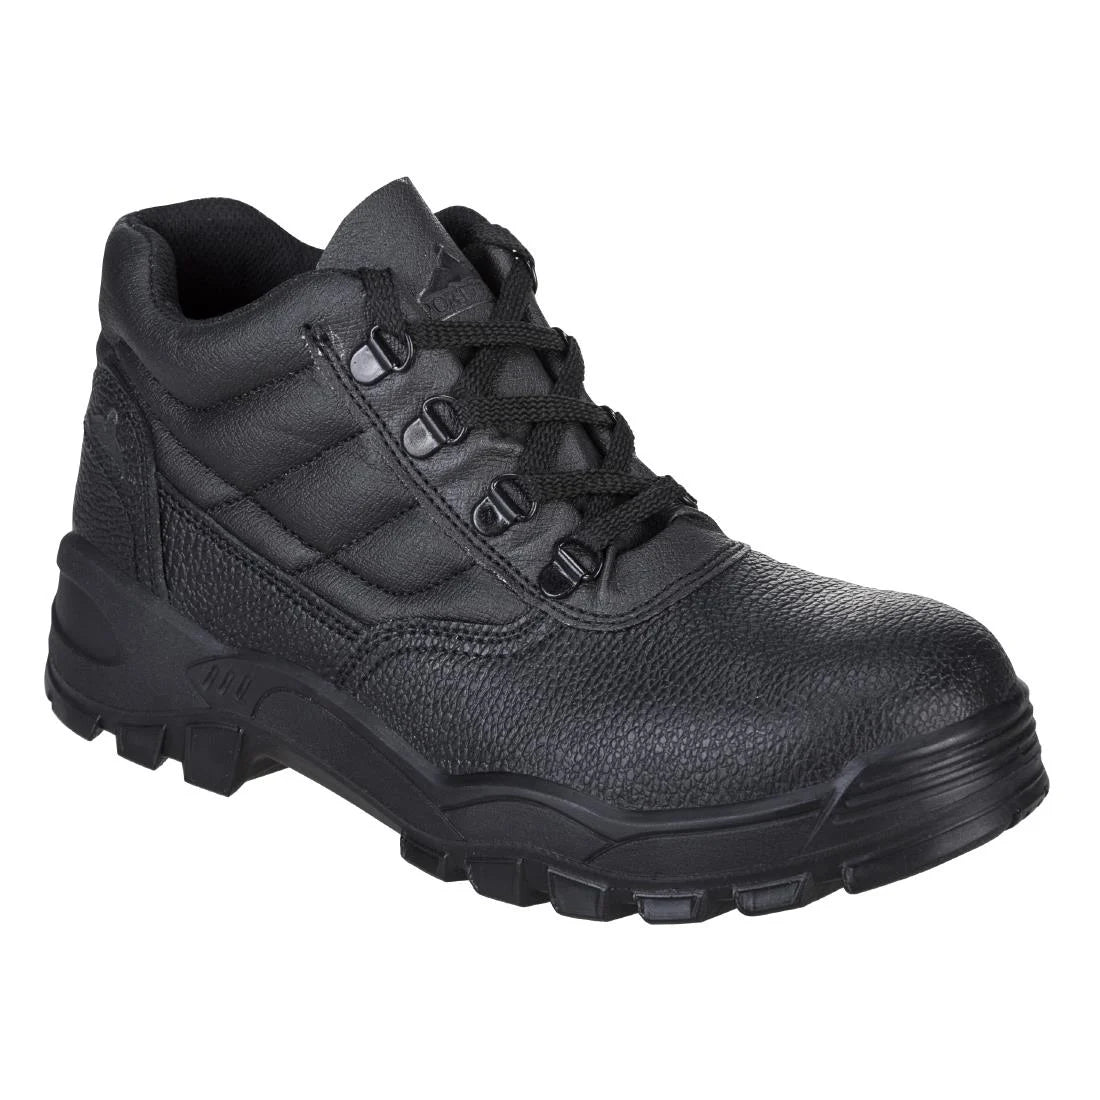 BA059-38 Portwest Protector Boot S1P Black Size 38 JD Catering Equipment Solutions Ltd